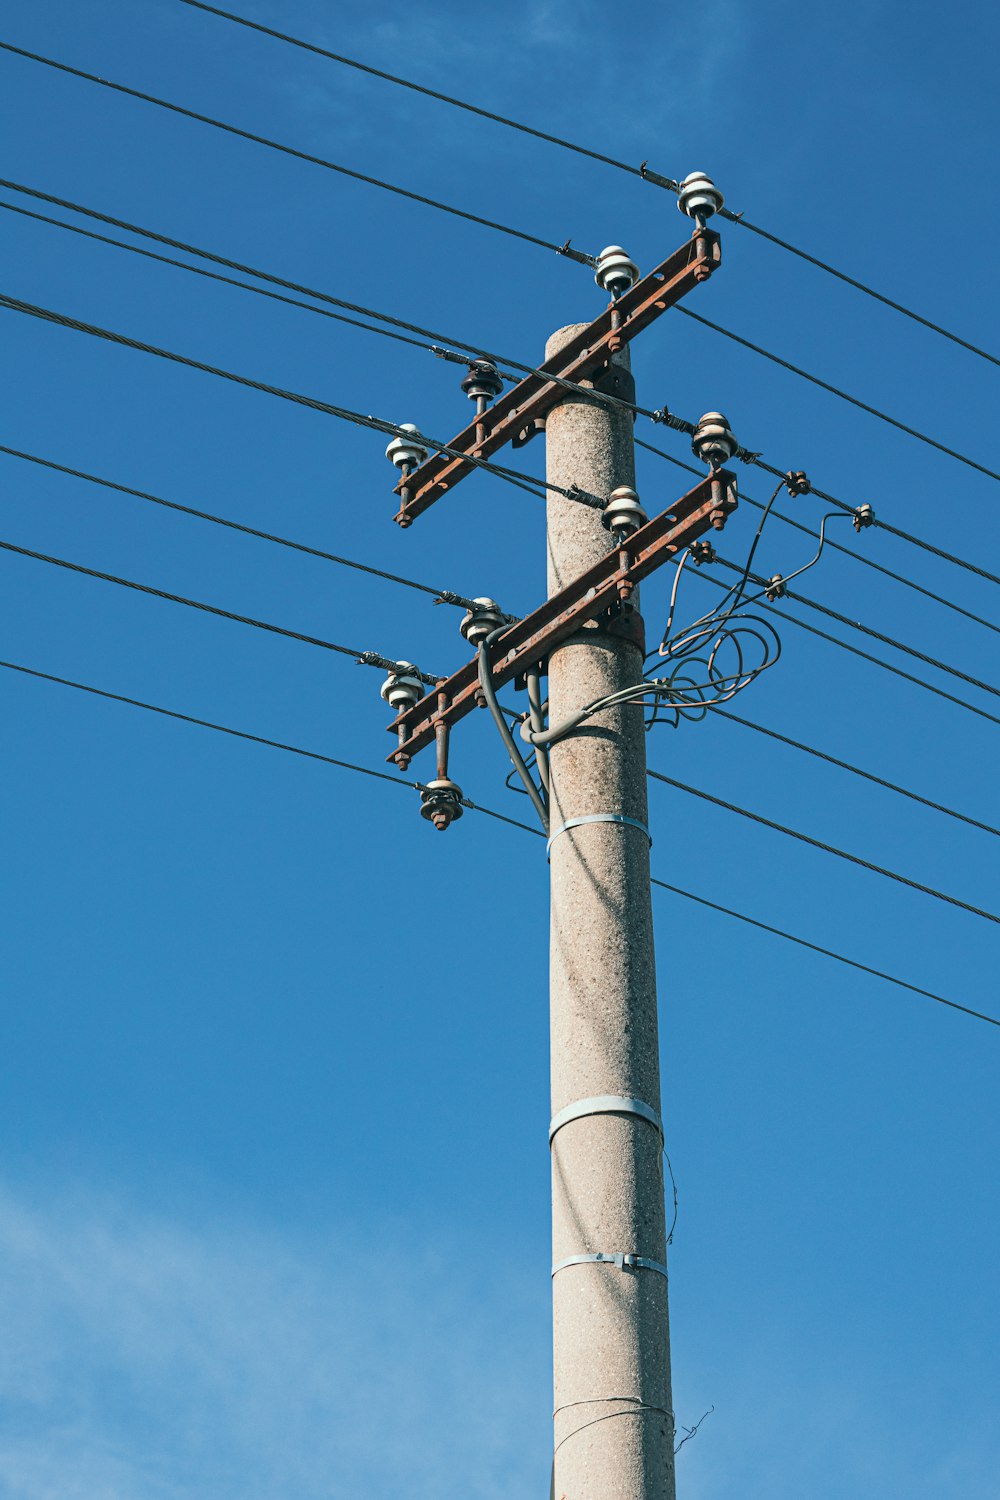 a pole with many wires